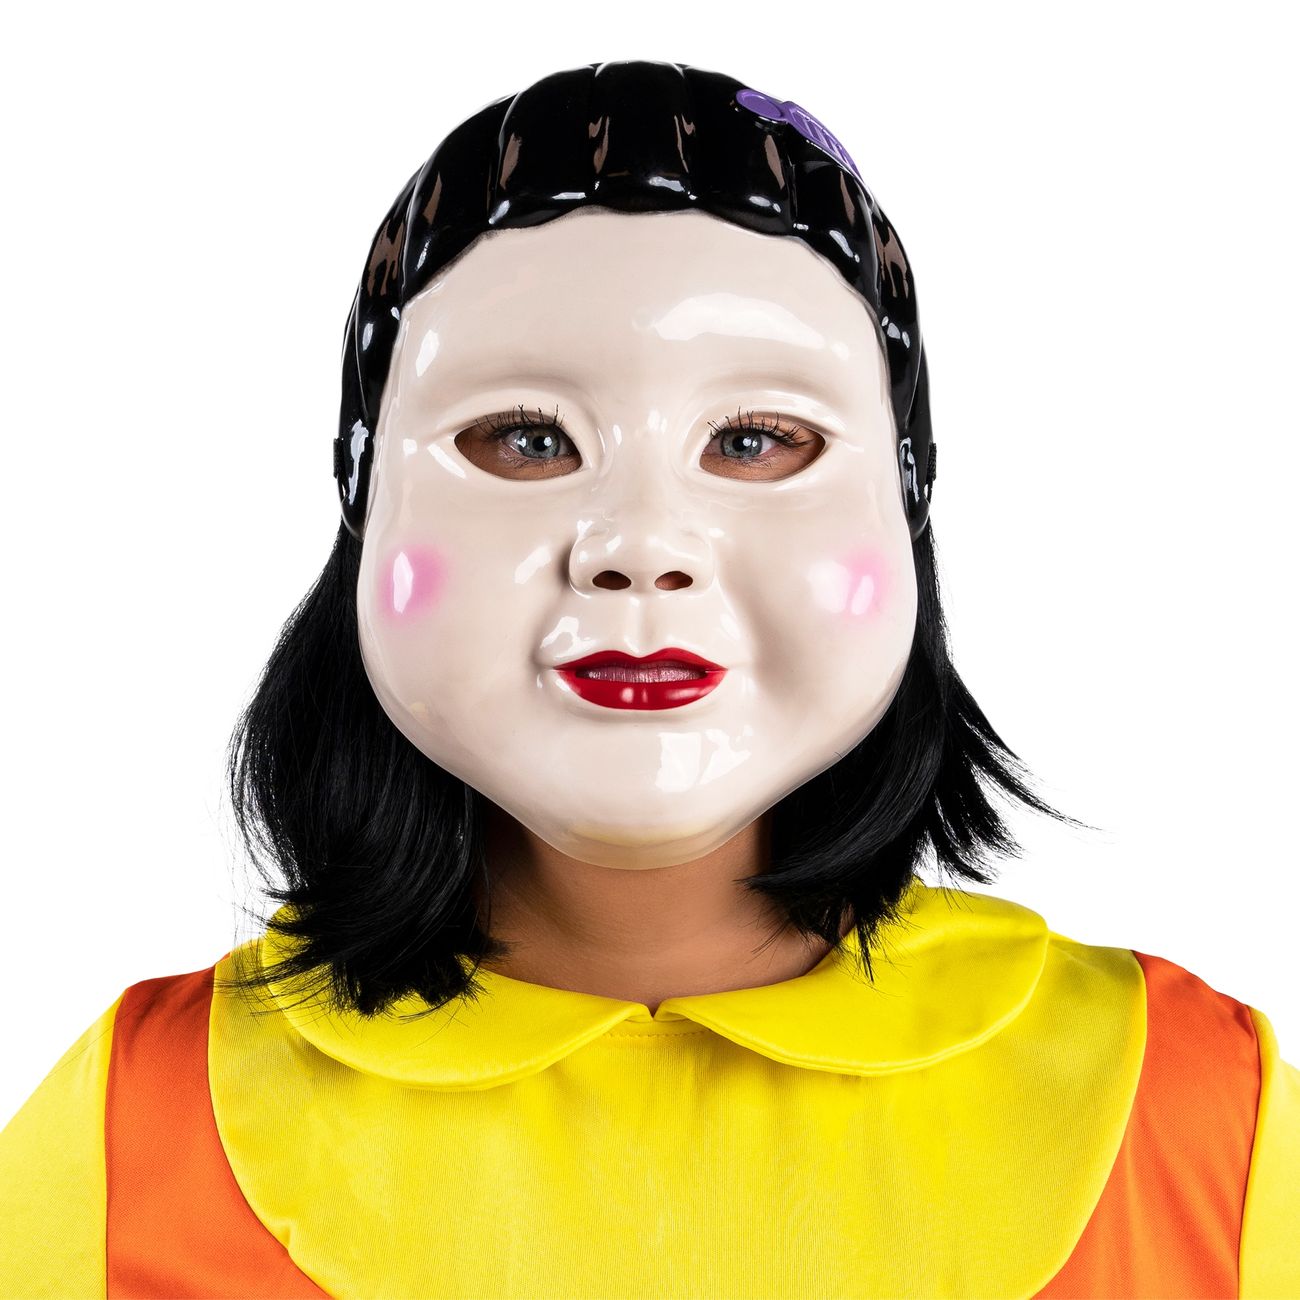 squid-game-doll-mask-88818-2